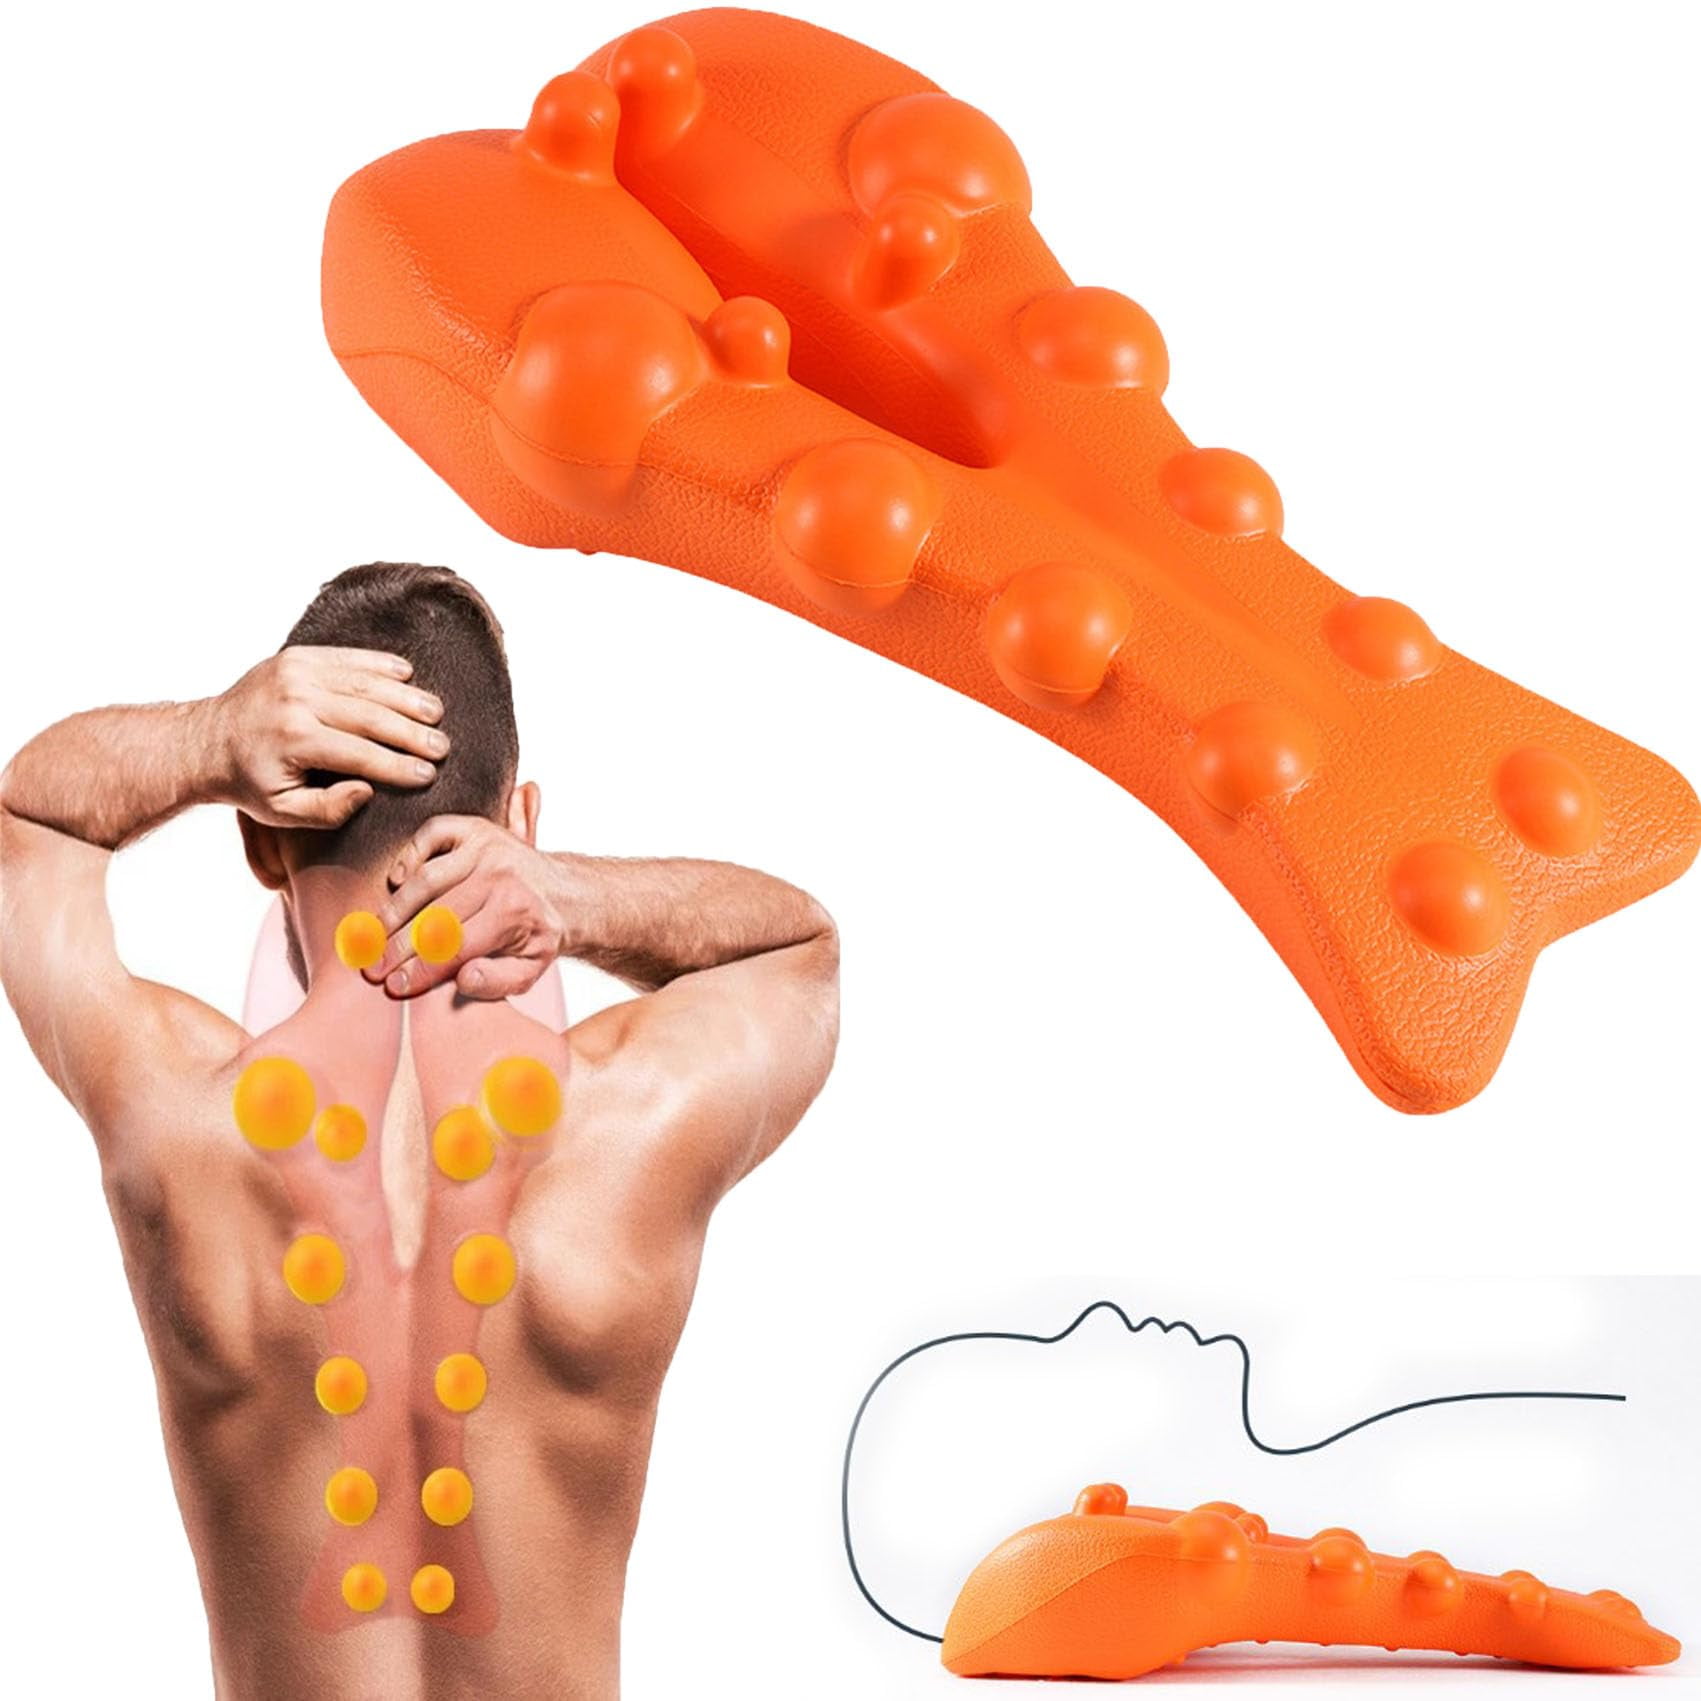 Trapezius Stretcher, Trapezius Trigger Point Massager, Muscle Knot Remover  for Back, Trapezius and Neck Massage Tool,Relieve Upper Back Pain &Tension